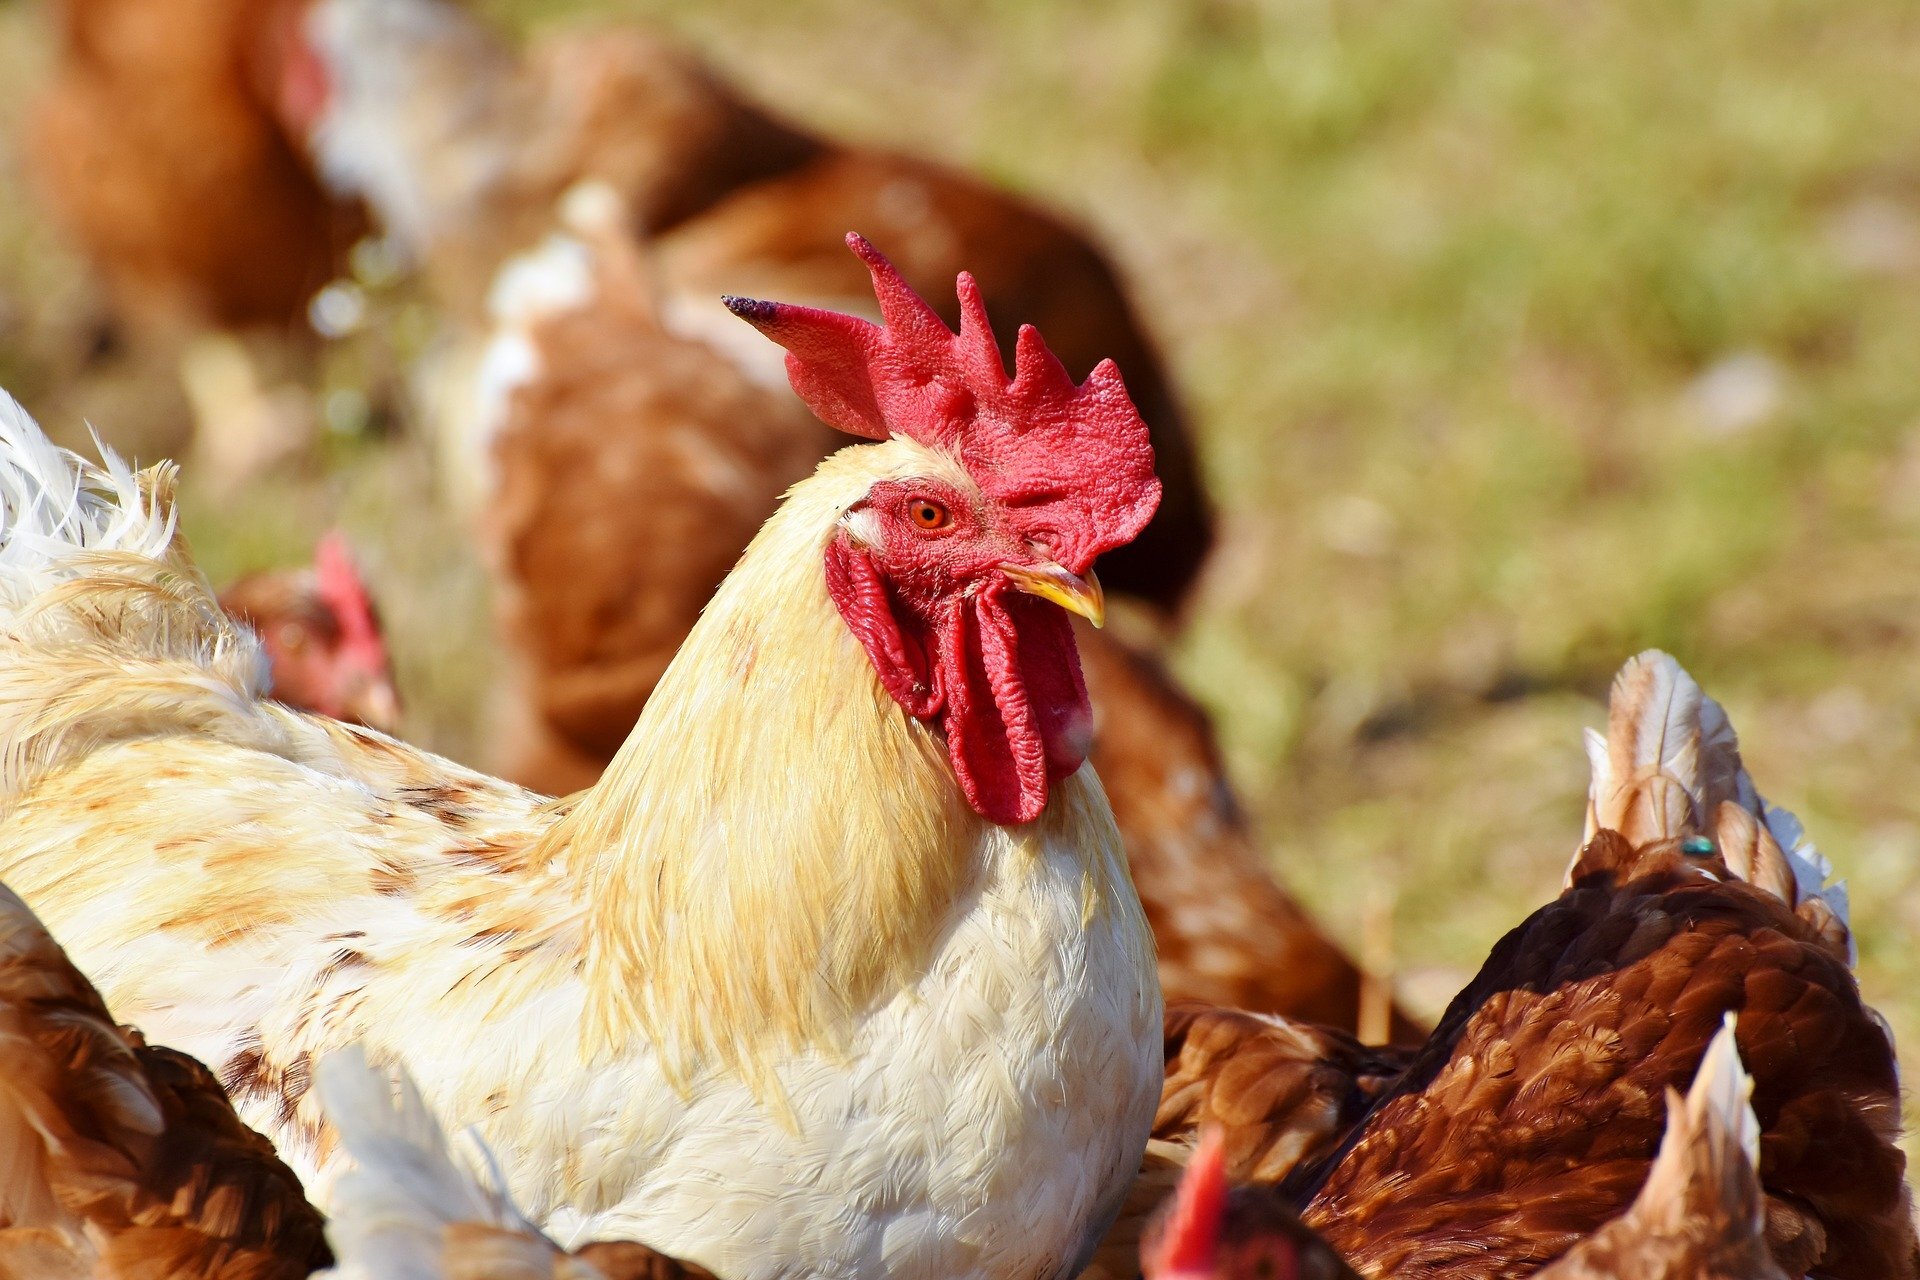 Environmentally conscious consumers more likely to buy chicken raised on insects or algae